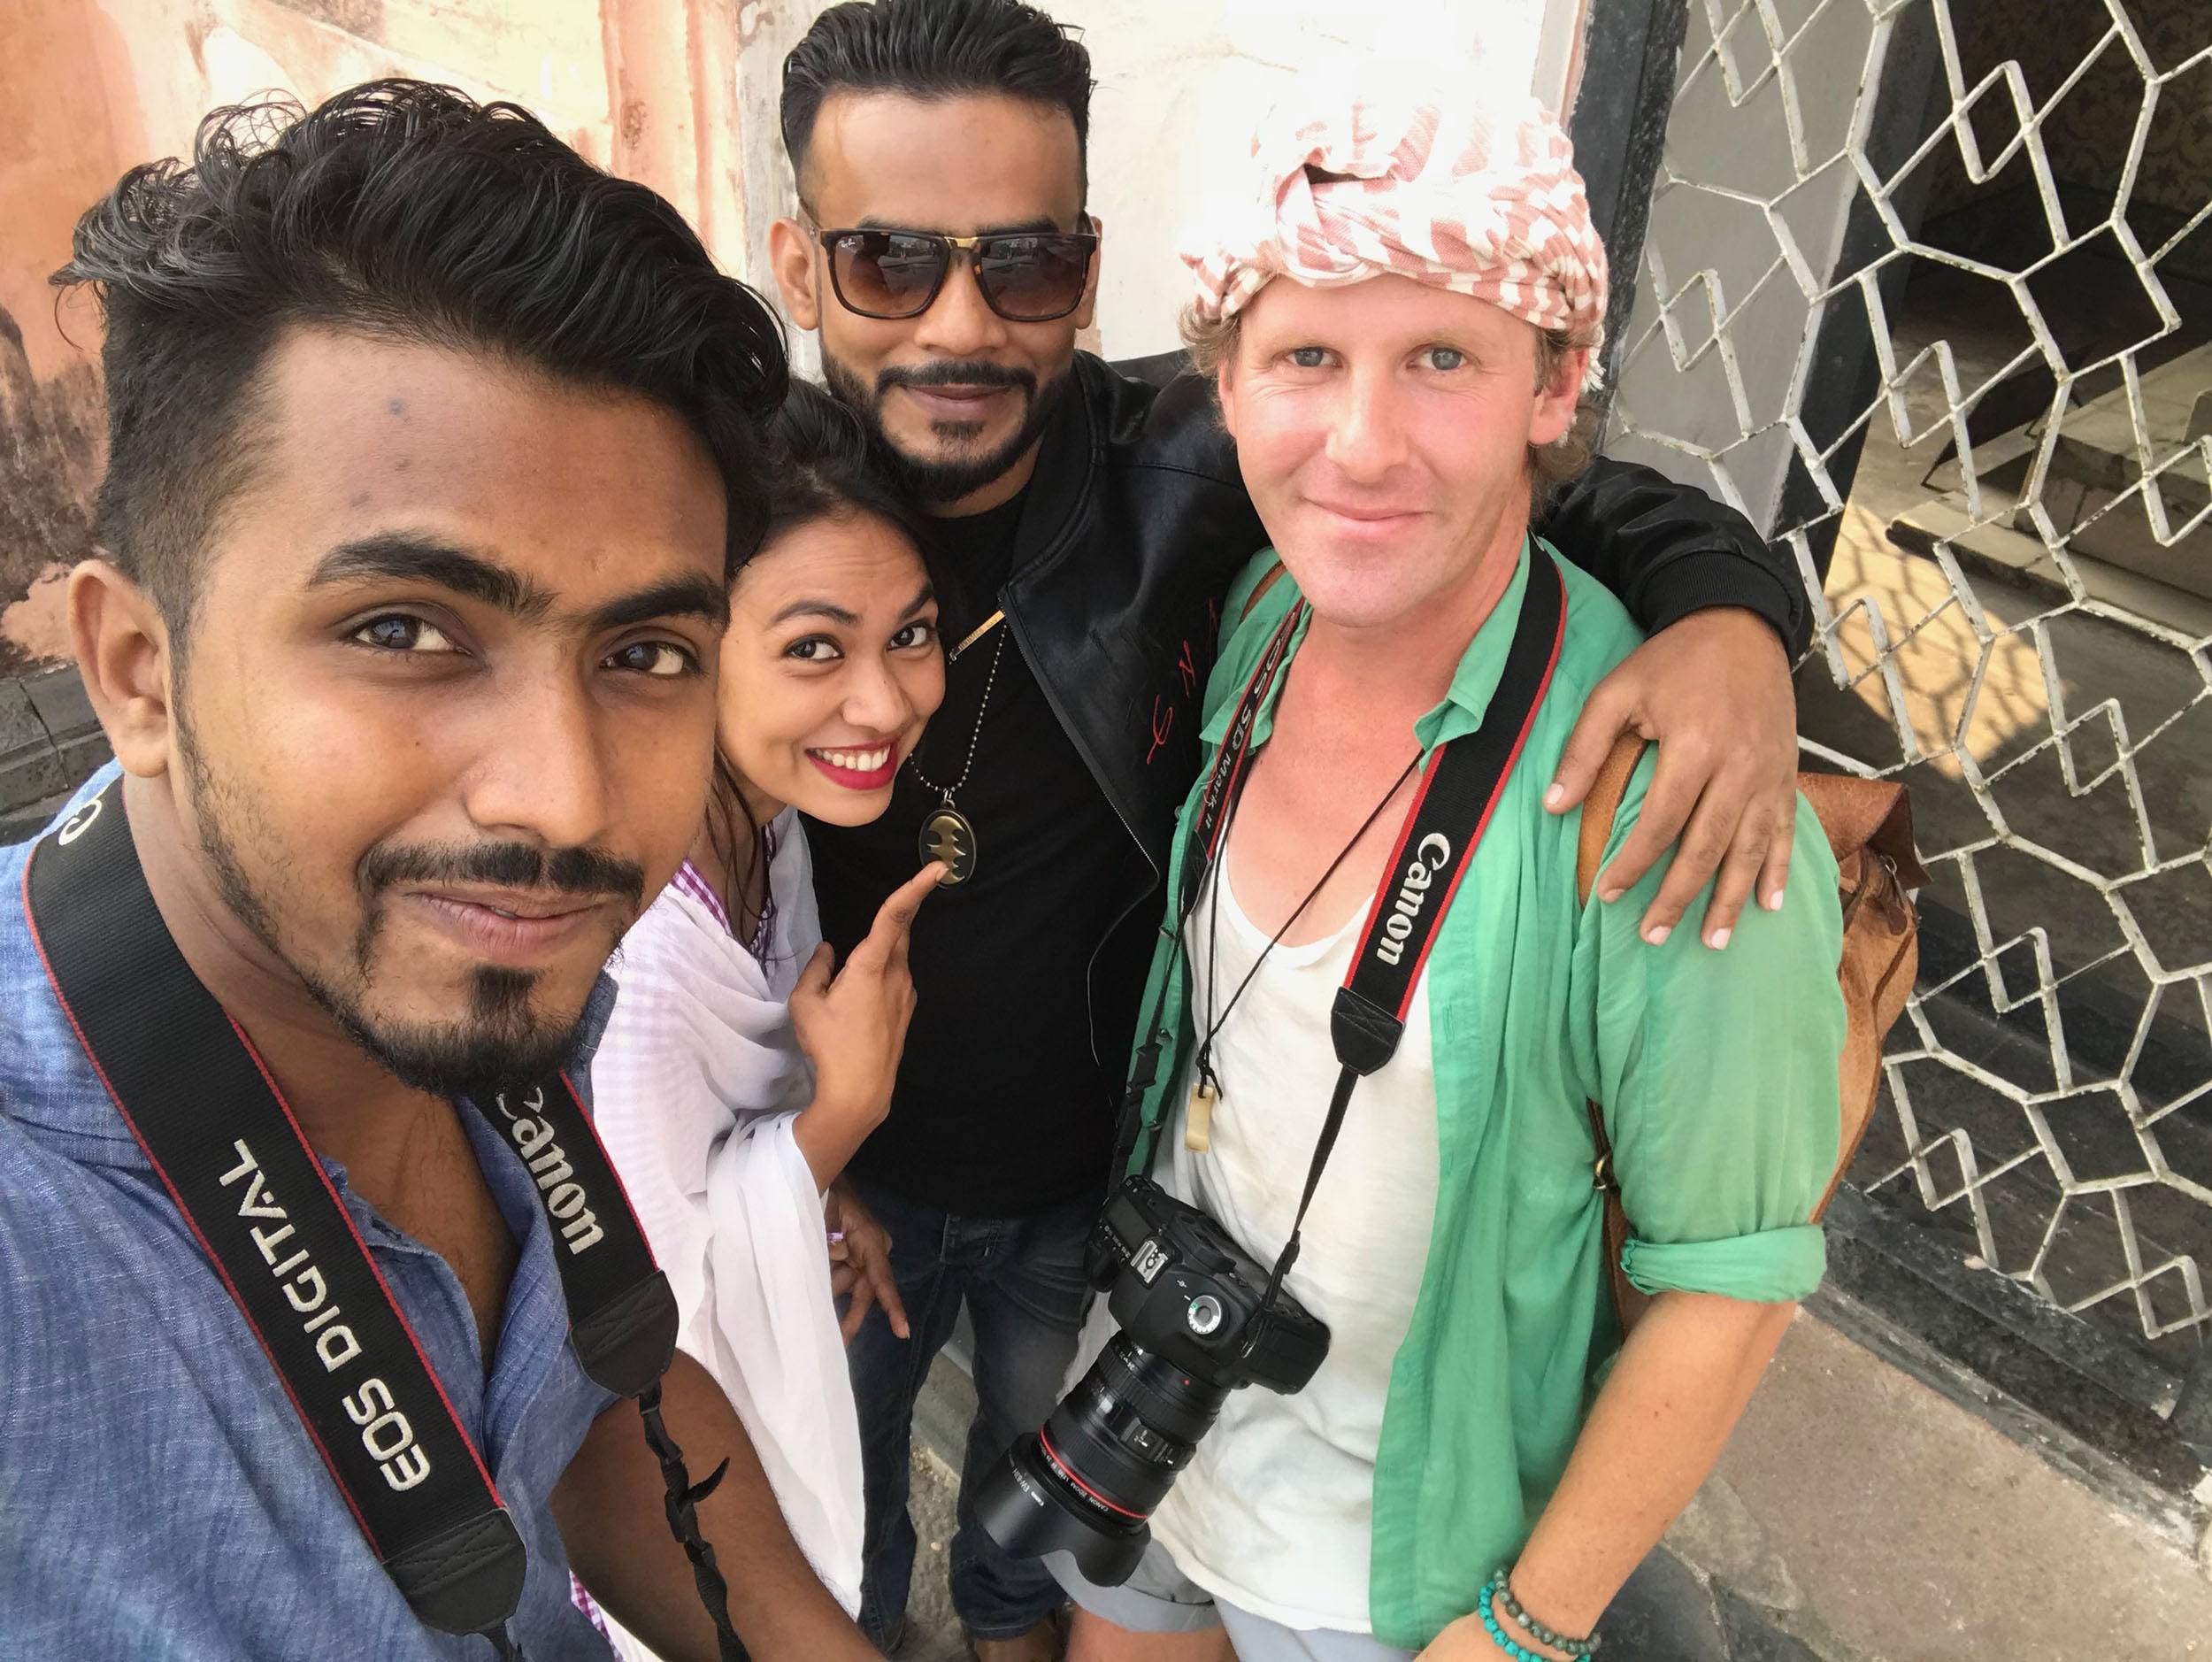 Ben with locals at Lalbagh Fort in Dhaka Bangladesh